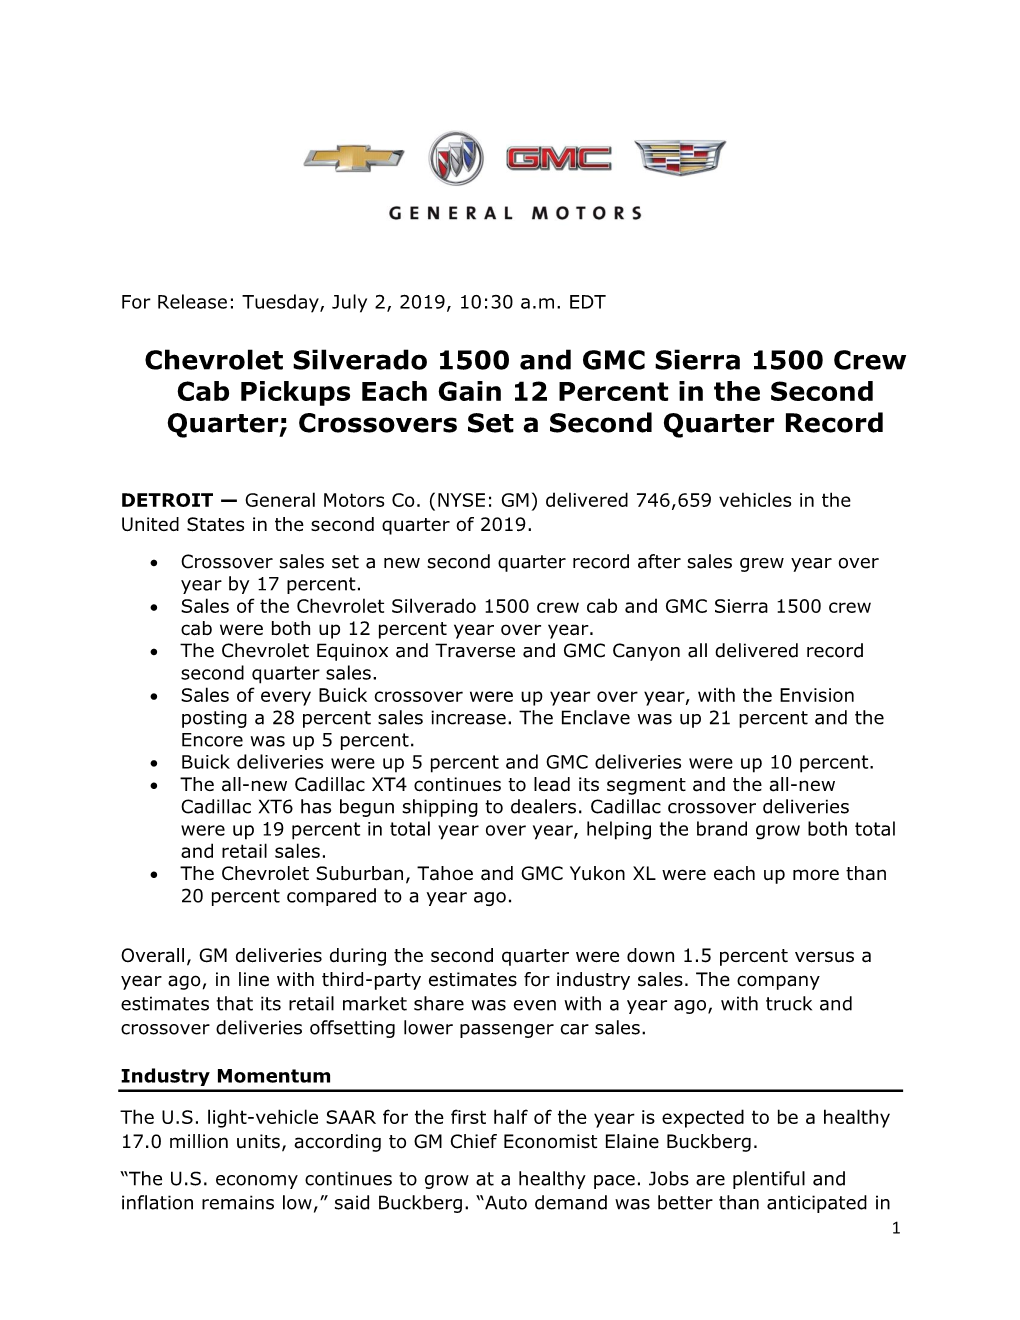 Chevrolet Silverado 1500 and GMC Sierra 1500 Crew Cab Pickups Each Gain 12 Percent in the Second Quarter; Crossovers Set a Second Quarter Record